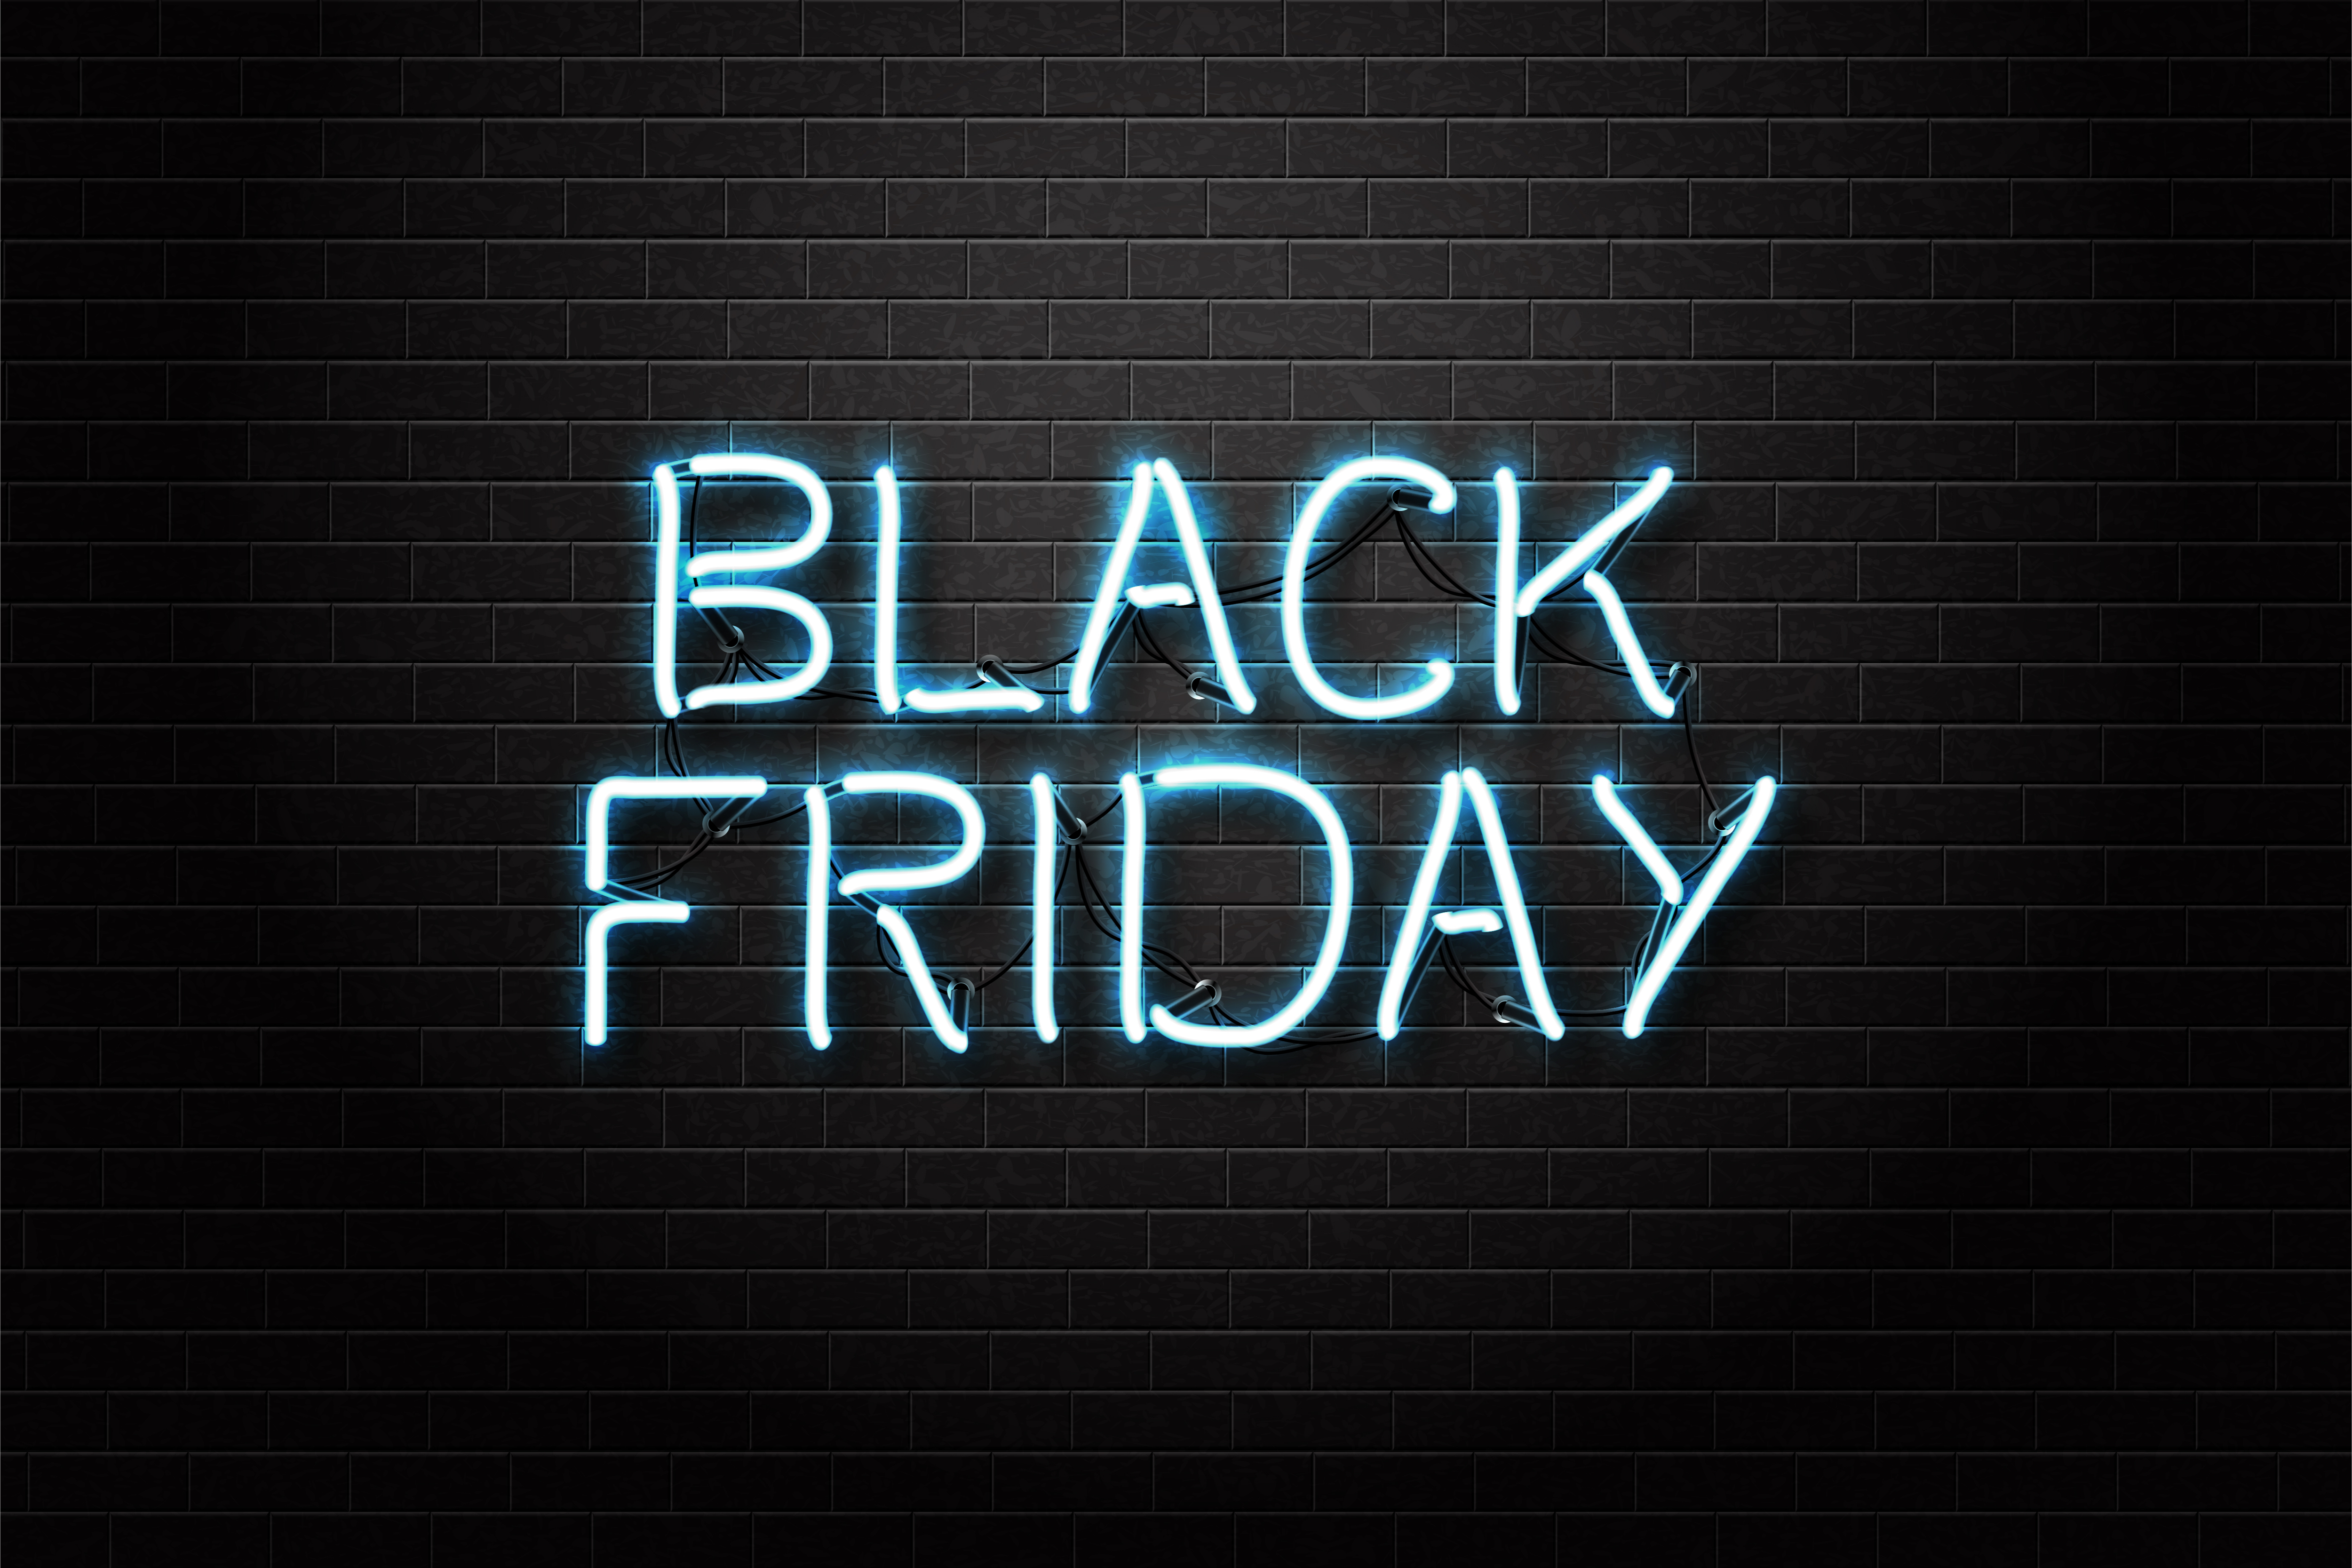 Don’t miss out on all the Black Friday sales just because you’re in the Middle East. Read how they became White Friday in the Arab world.